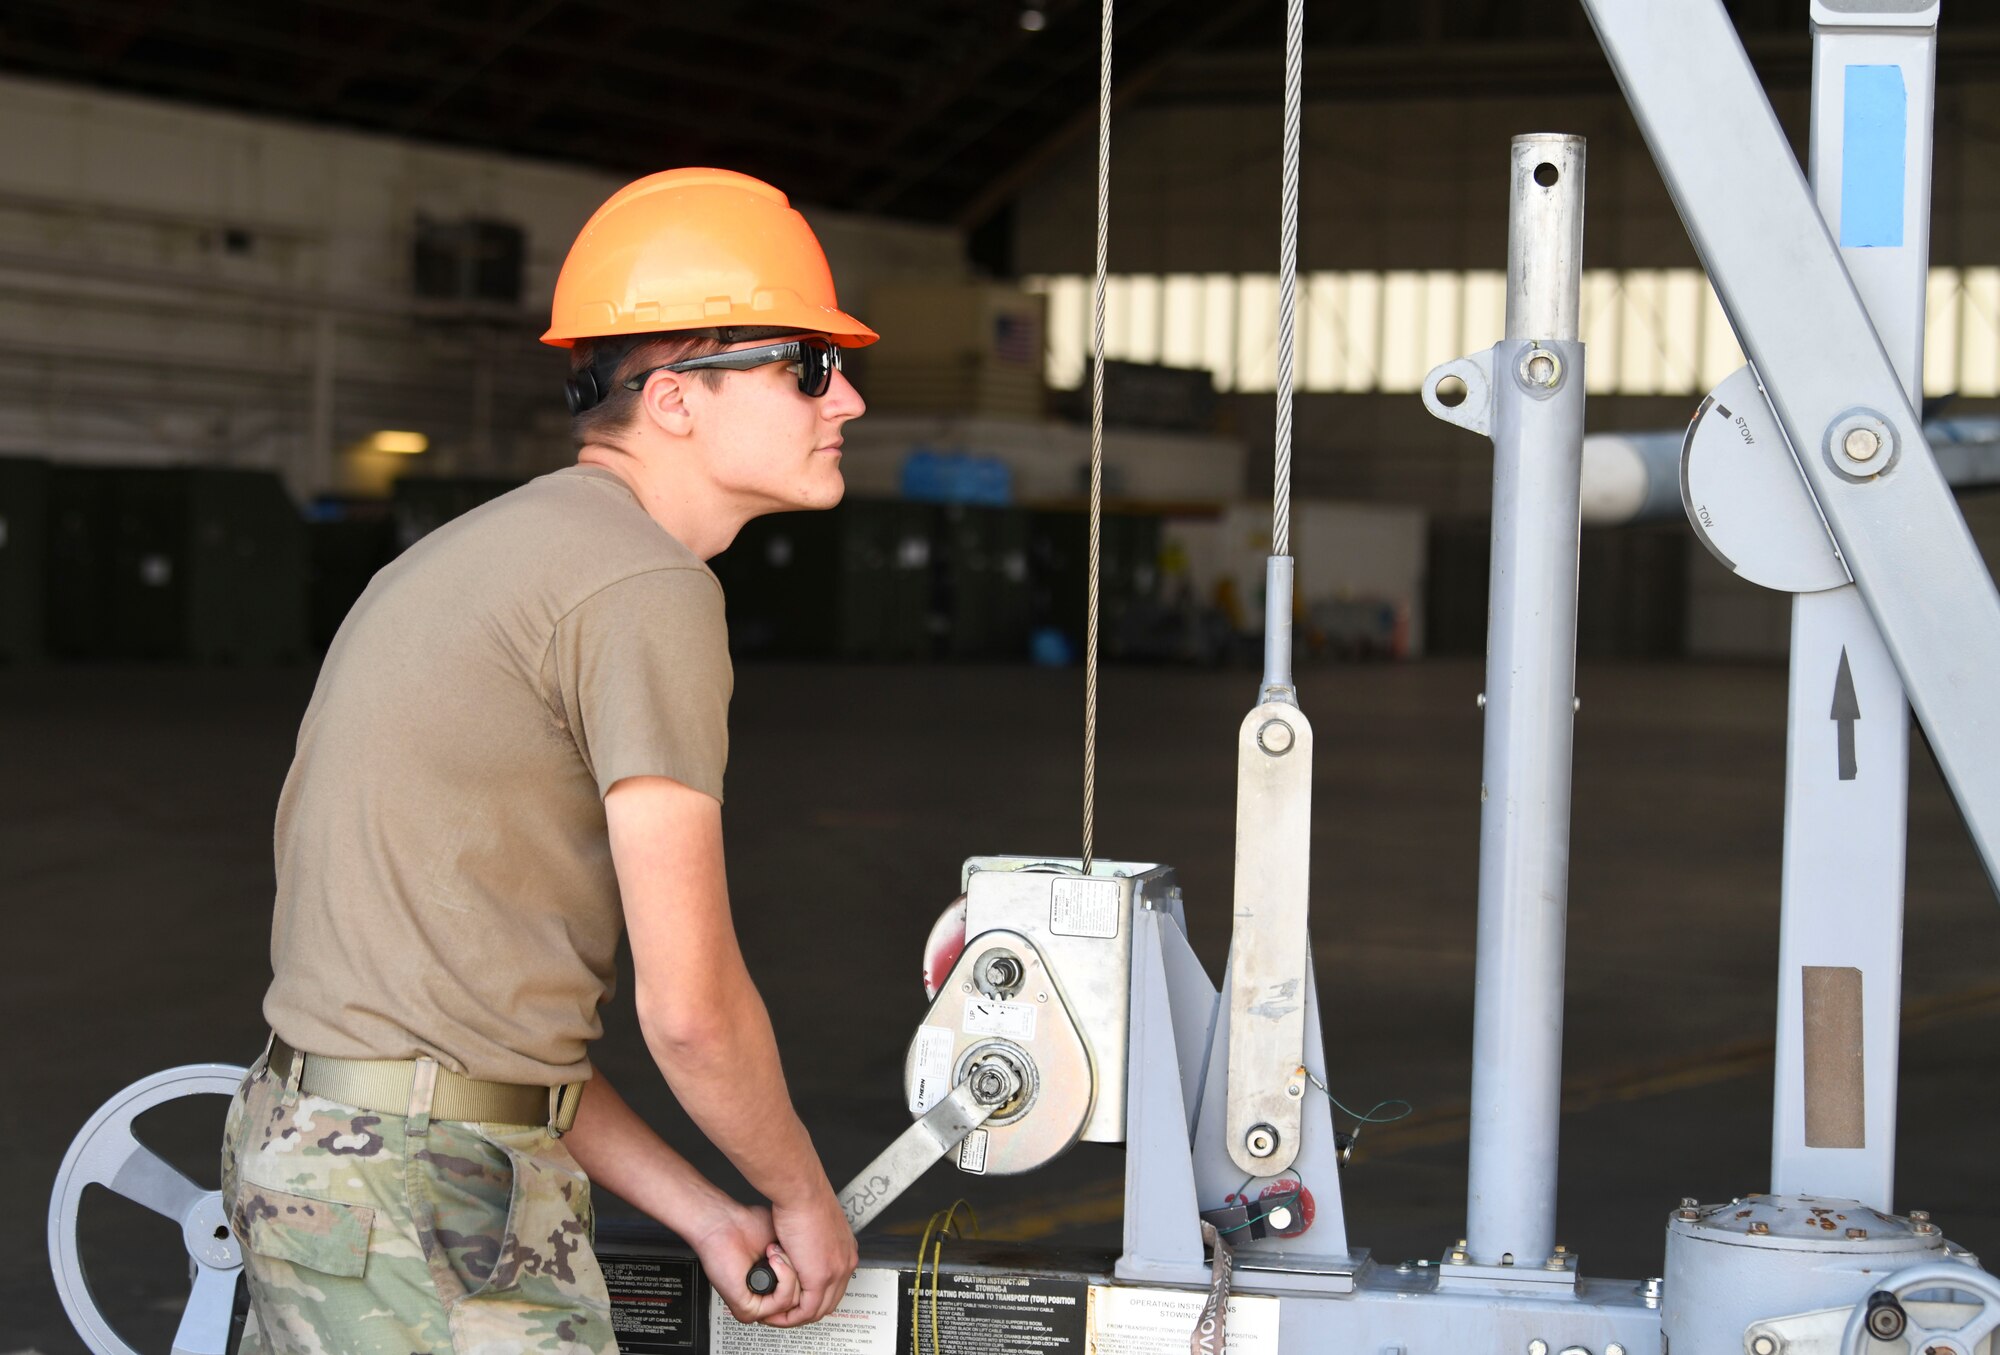 A Military member working with a crane on a jet.